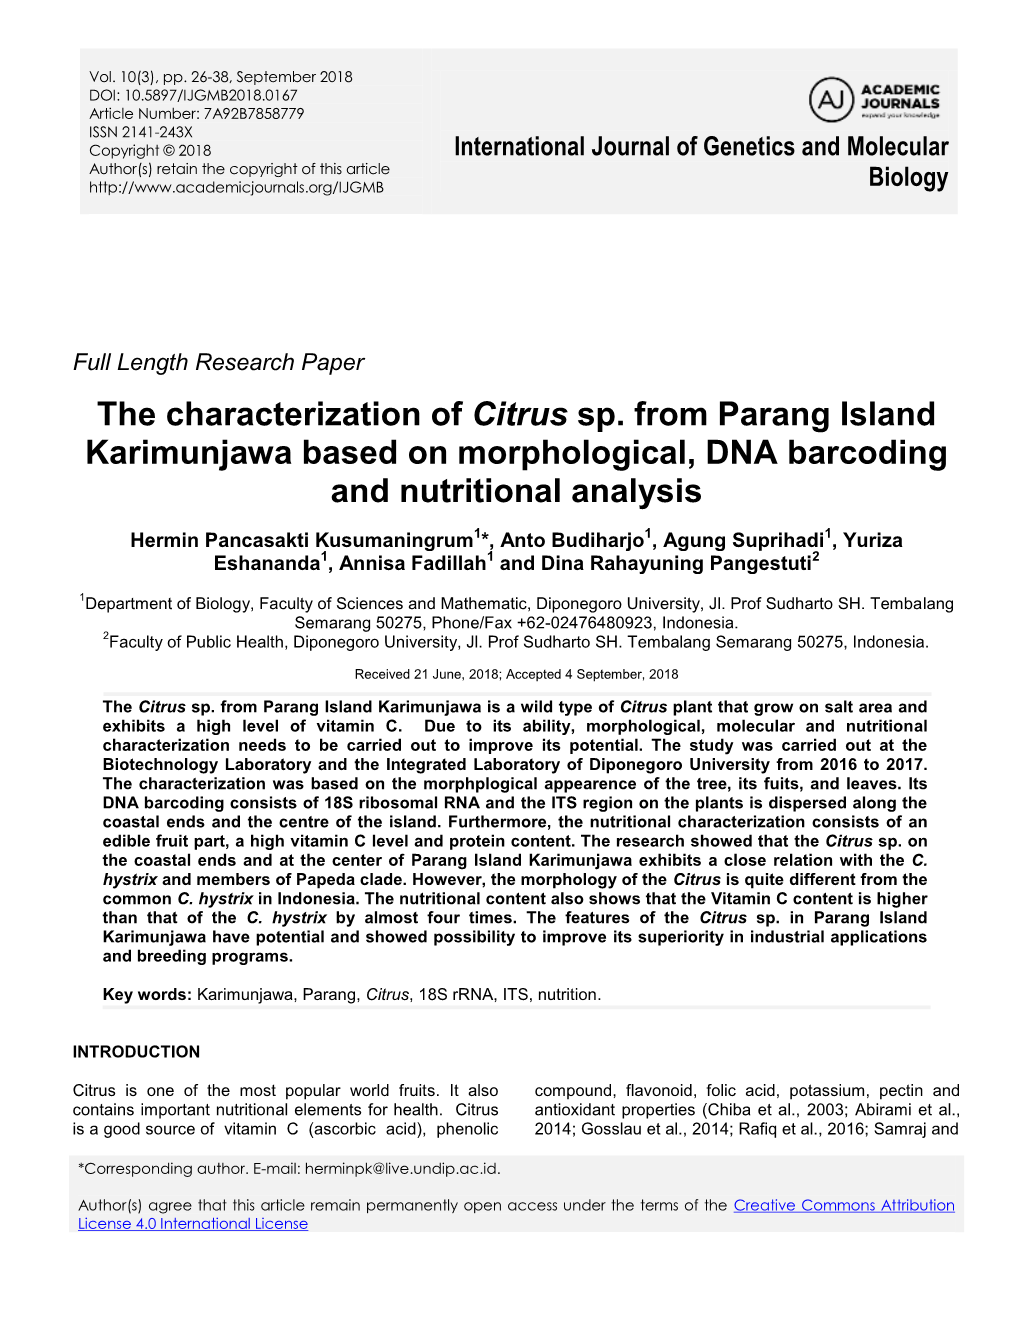 The Characterization of Citrus Sp. from Parang Island Karimunjawa Based on Morphological, DNA Barcoding and Nutritional Analysis